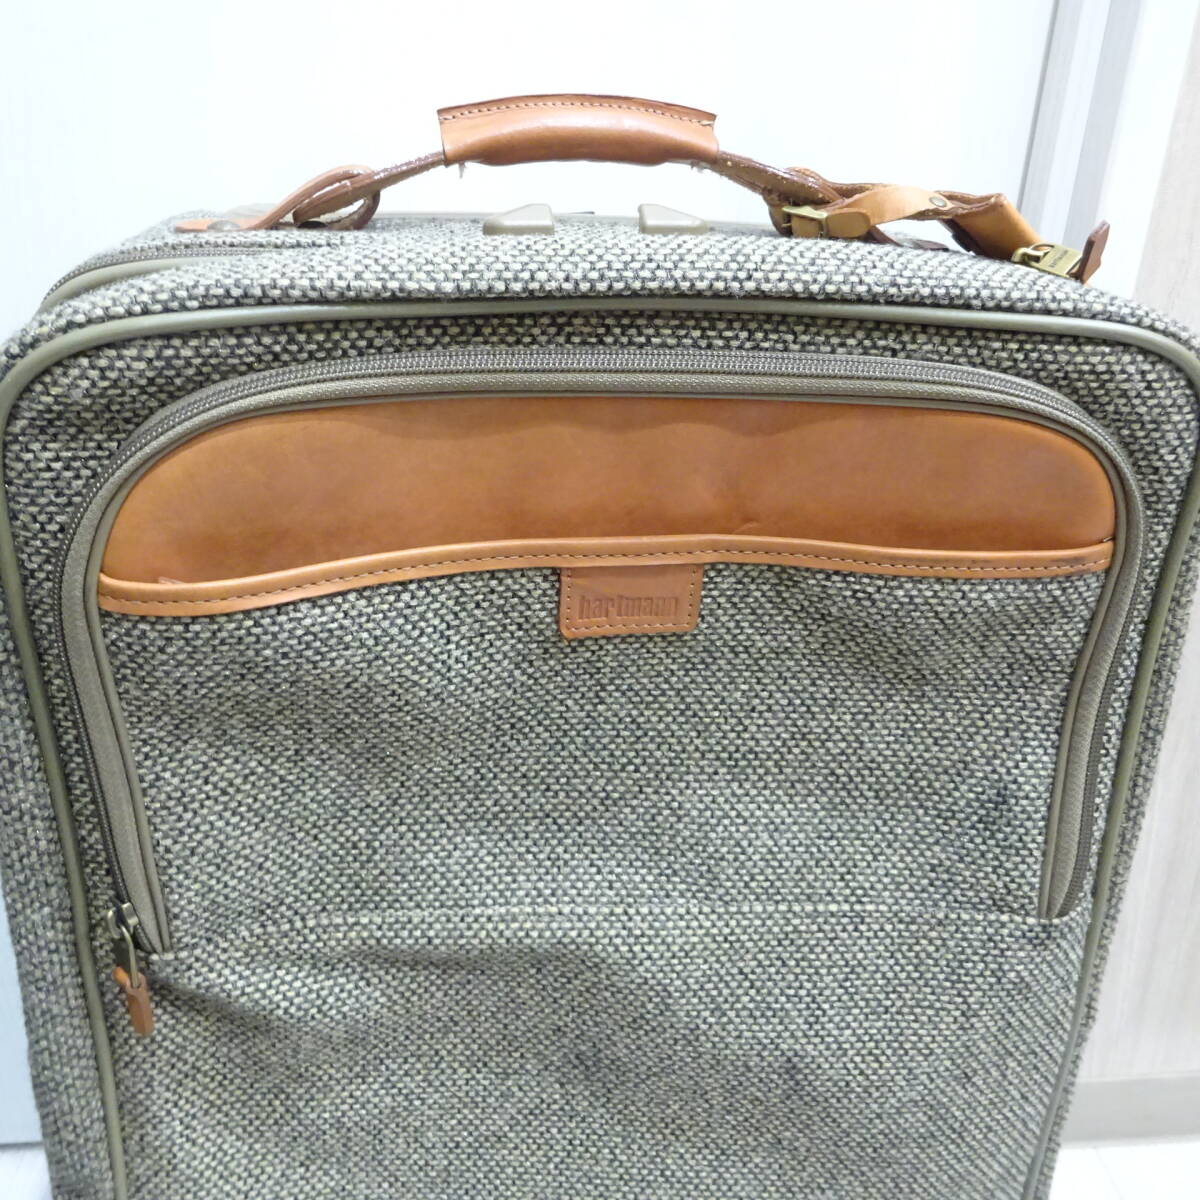 1 jpy ~ hartmann Heart man suitcase Carry case traveling bag trunk tweed leather 